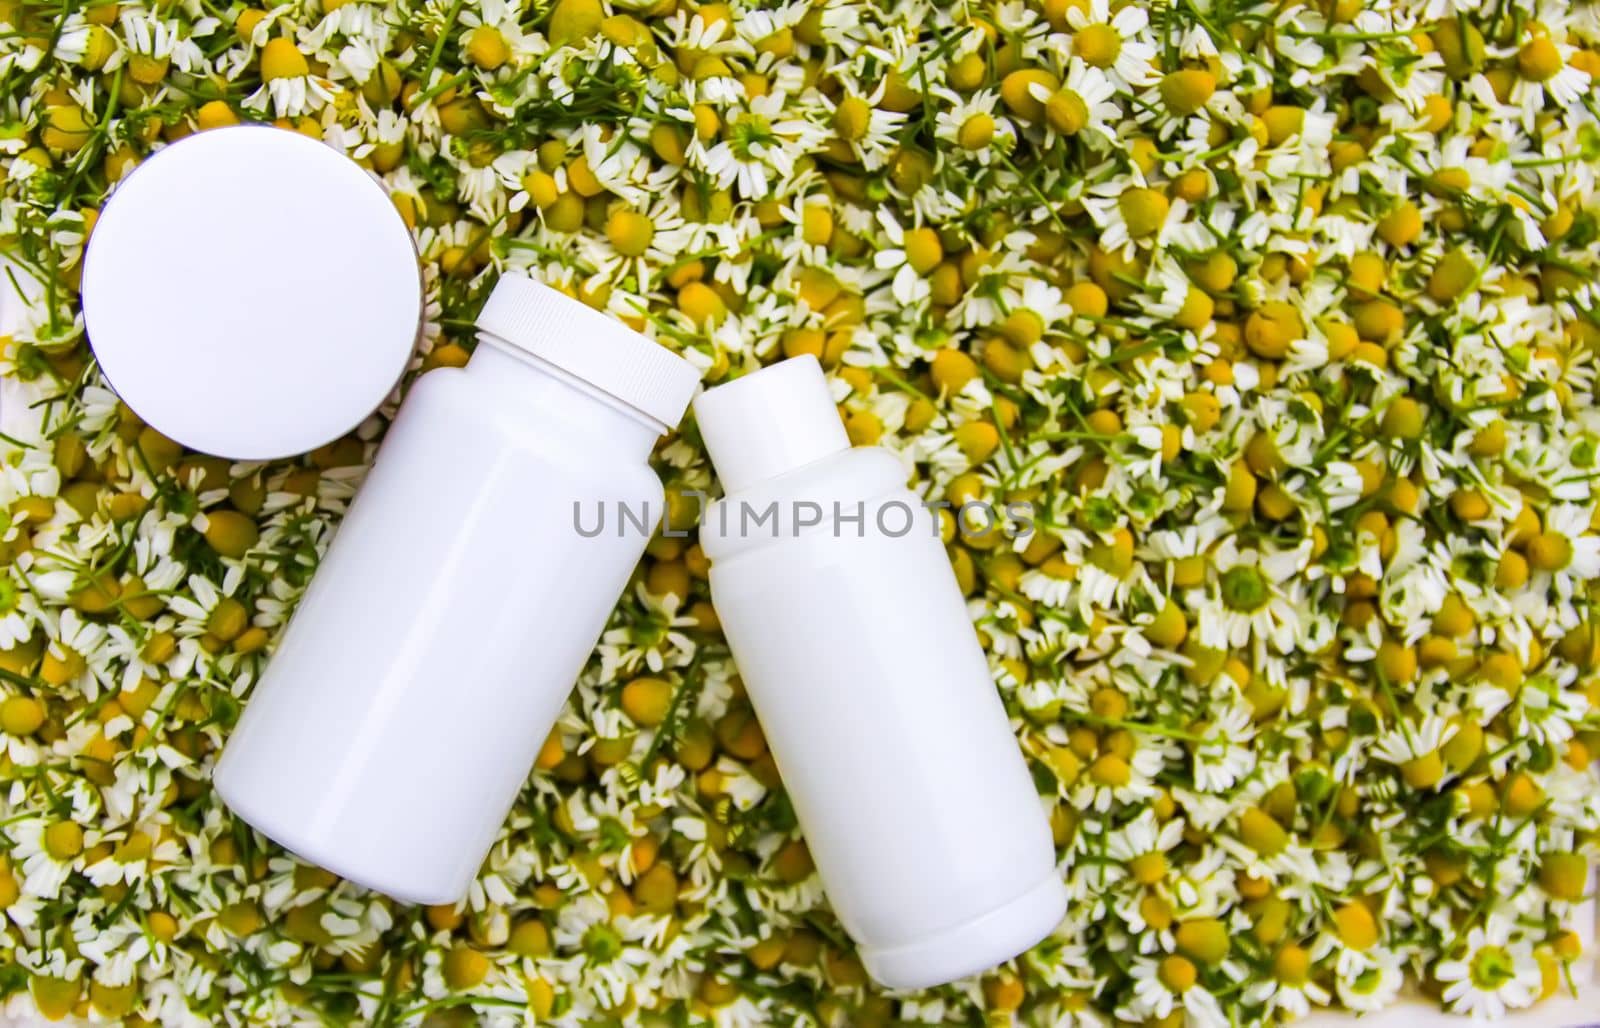 White plastic containers and Chamomile flowers for cosmetic products, herbal tea or treatment.